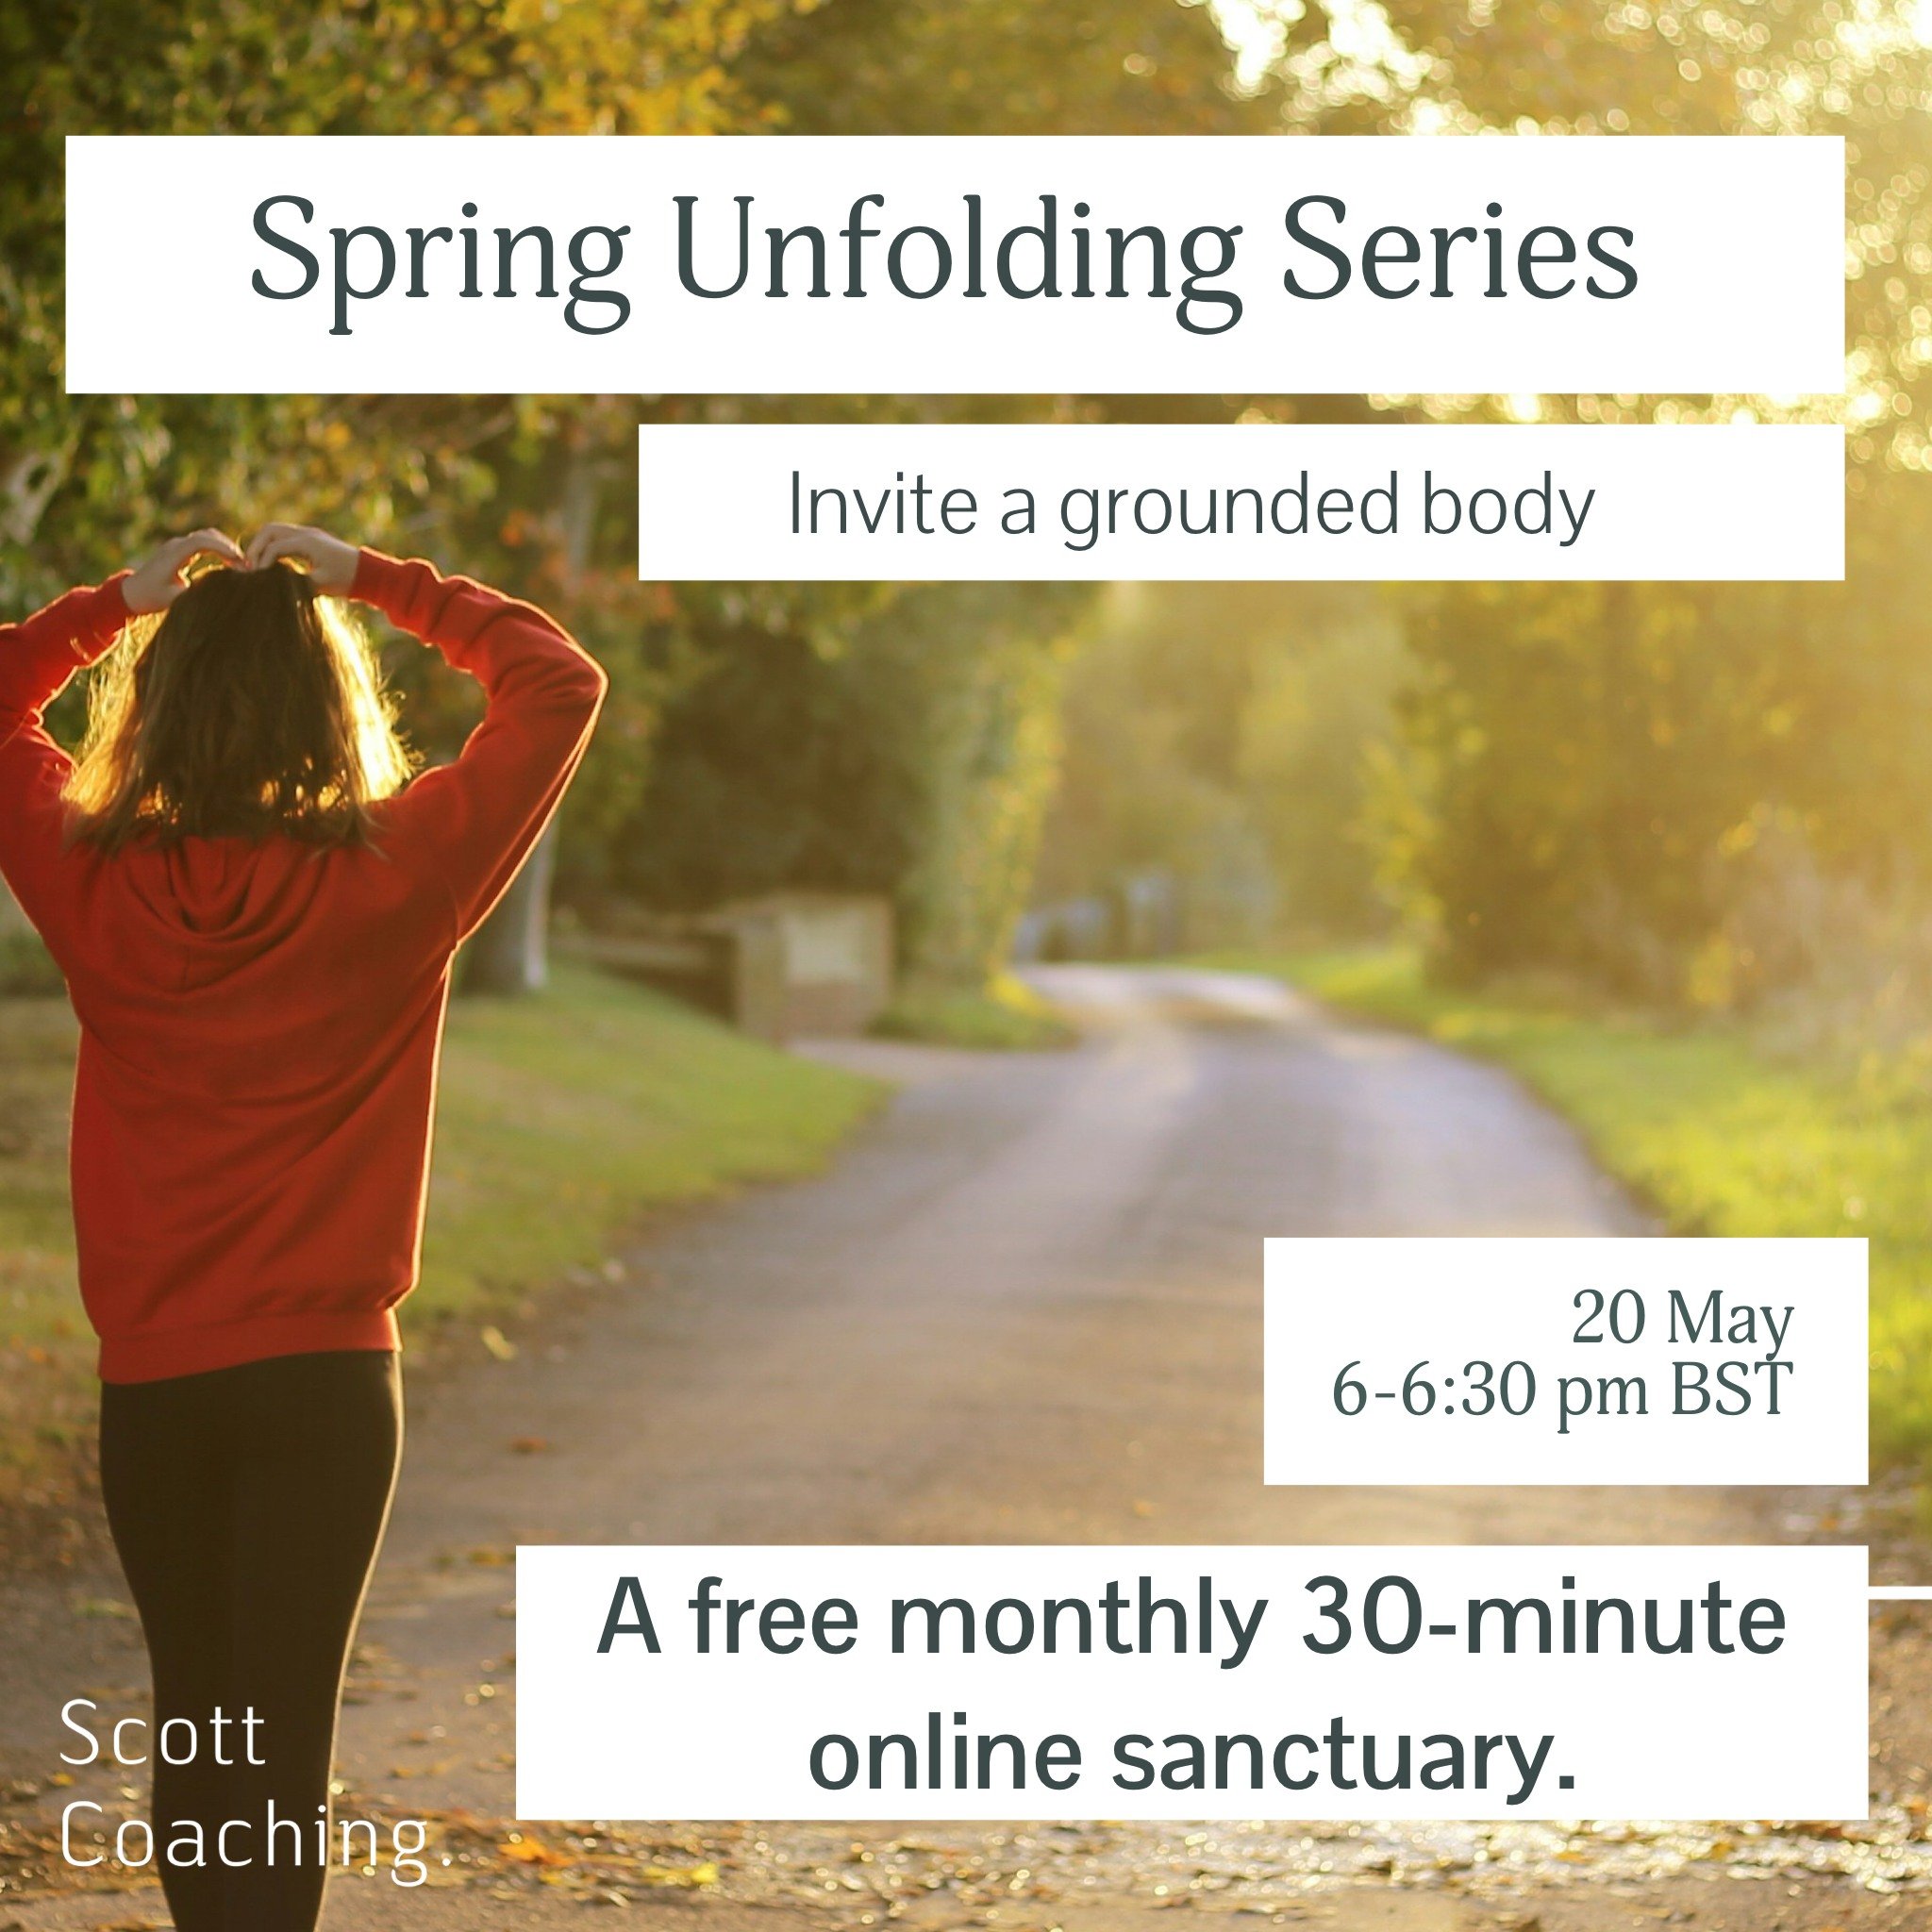 Join us tonight for the last session in the Spring Unfolding series! I'm excited to connect with all of you this evening at 6 pm BST (8 pm SAST).

If you're struggling to find time in your week to slow down and connect with your body, this session is